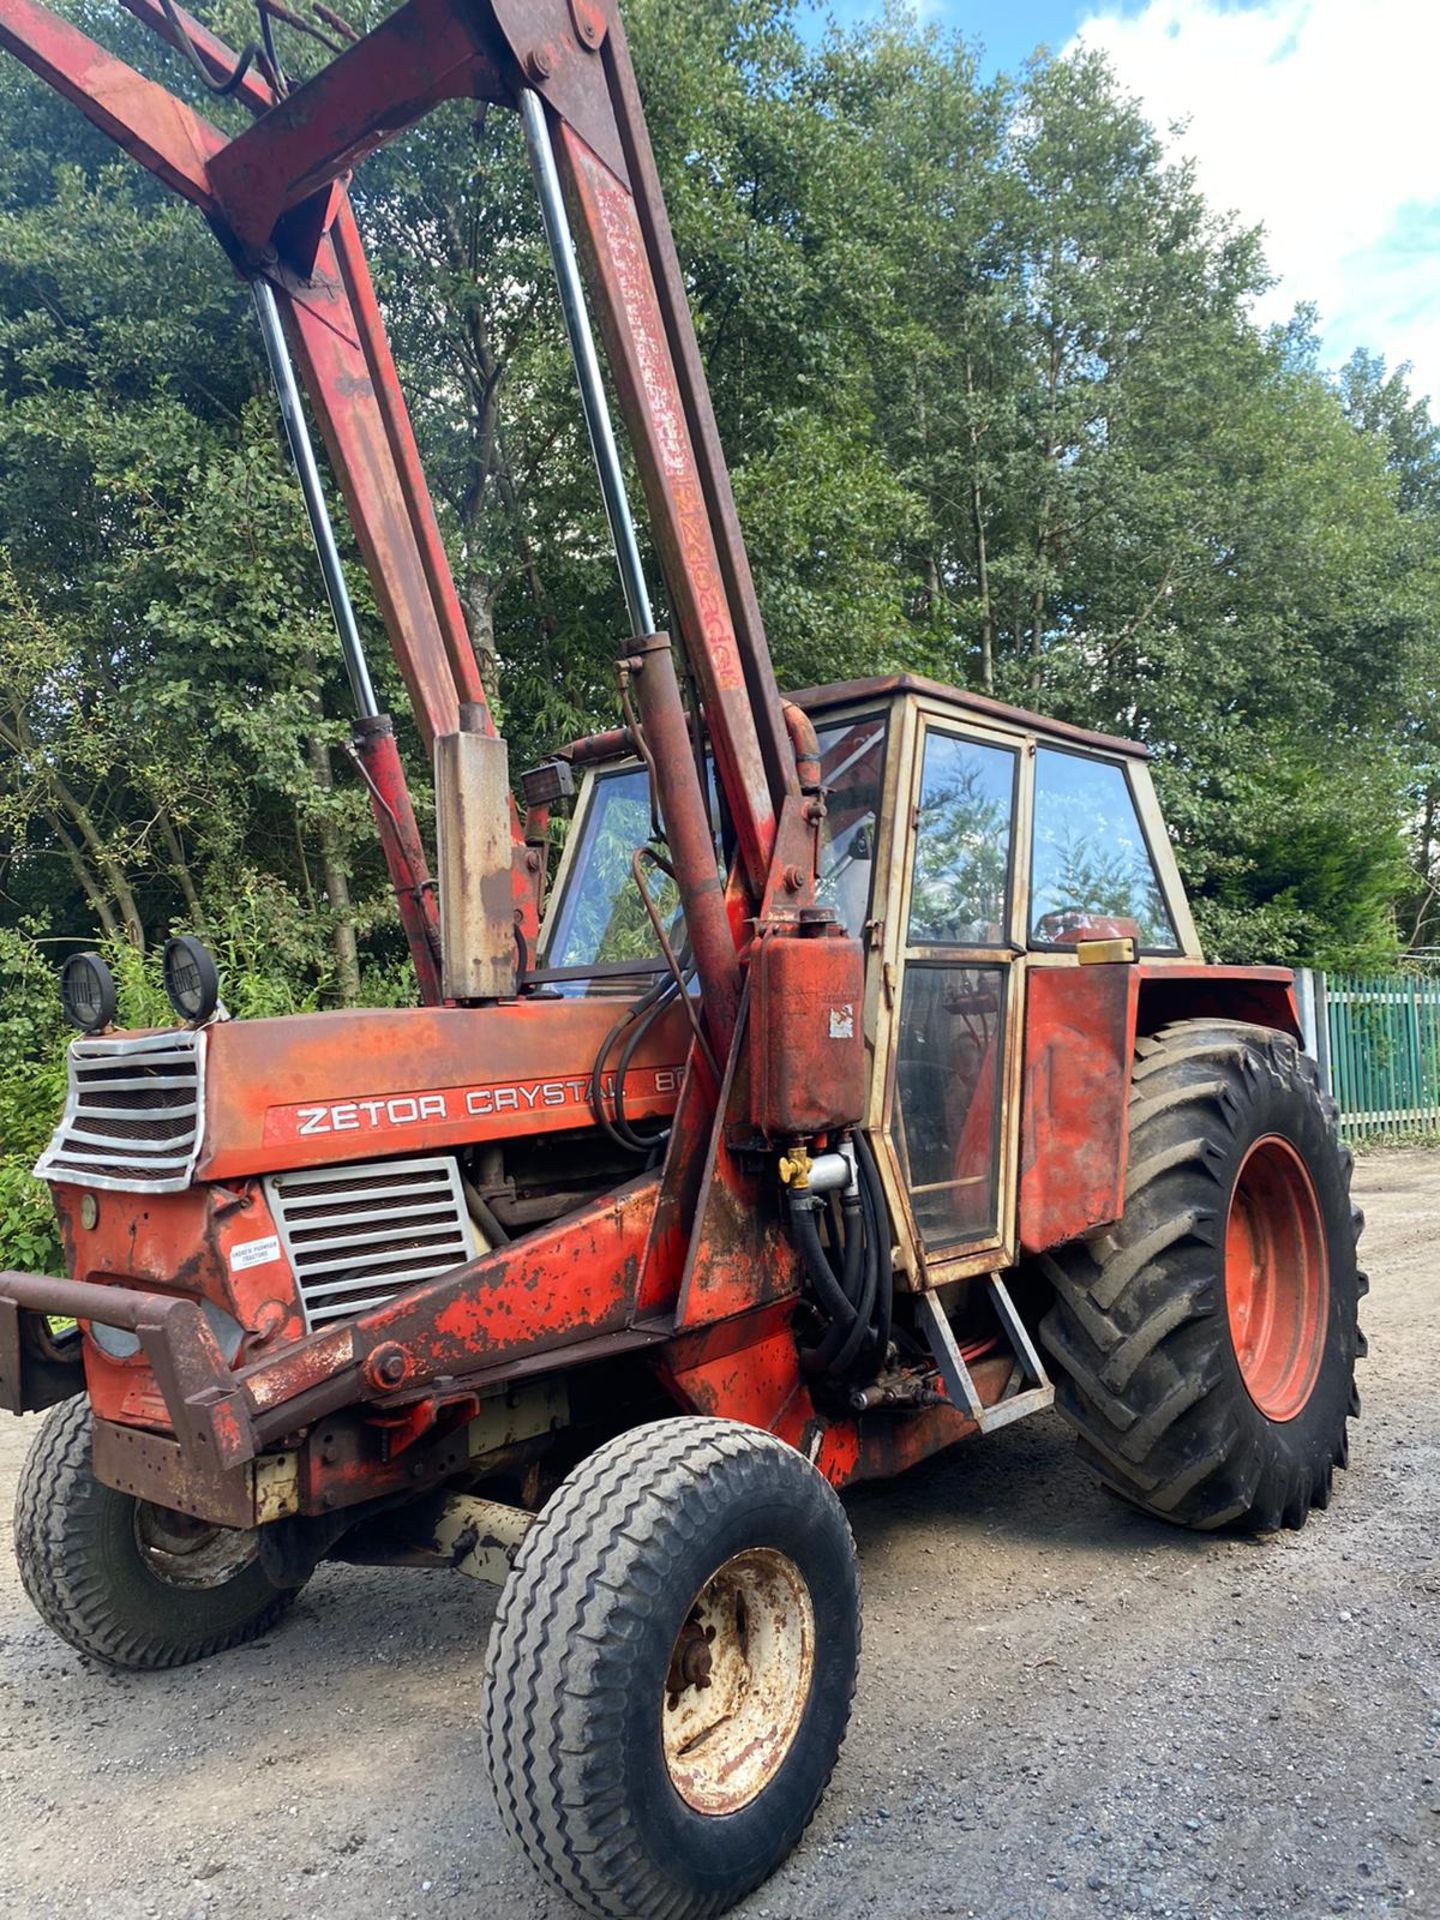 ZETOR CRYSTAL 8011 LOADER TRACTOR, RUNS, WORKS AND LIFTS, IN GOOD CONDITION *PLUS VAT* - Image 2 of 6